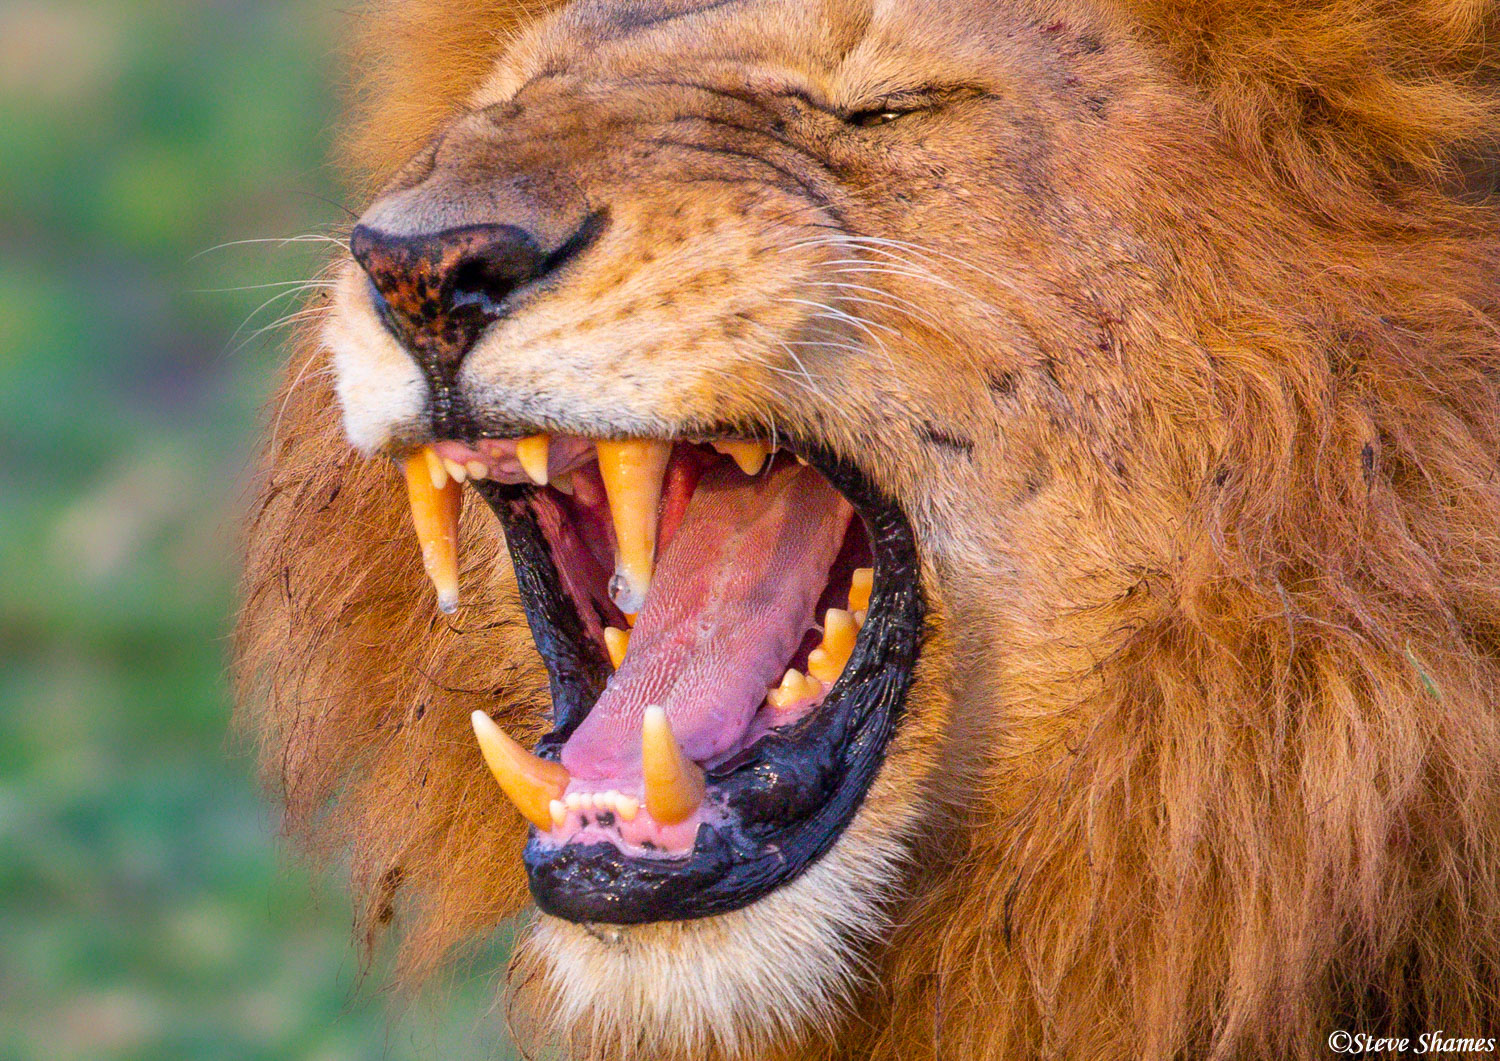 Male lion showing his teeth.